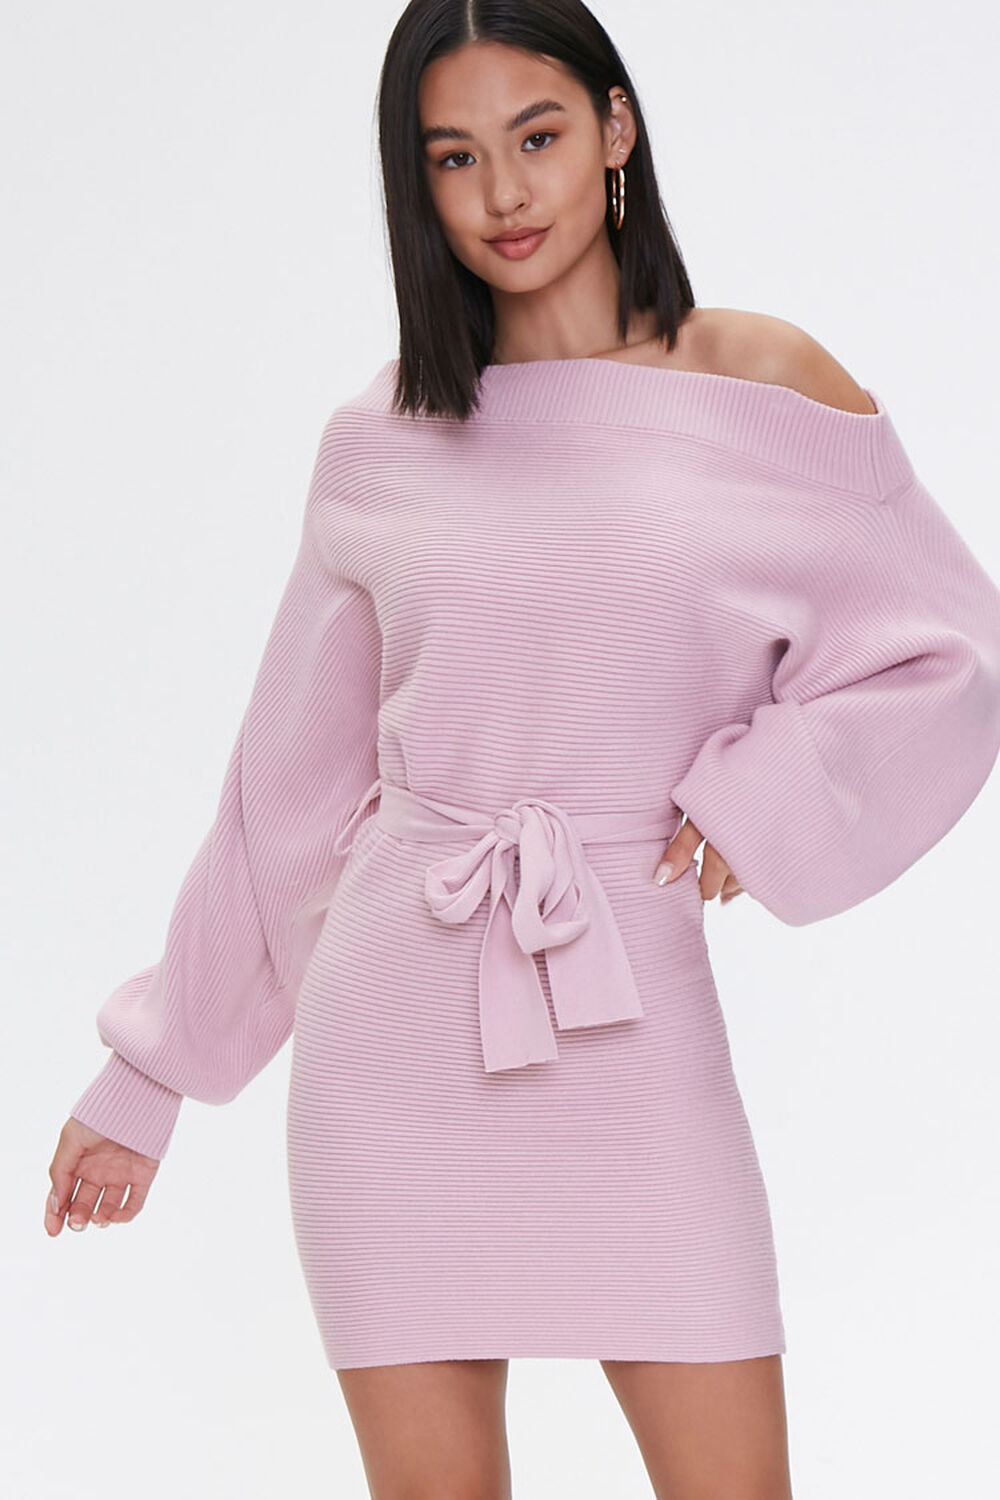 LILAC Off-the-Shoulder Sweater Dress, image 1